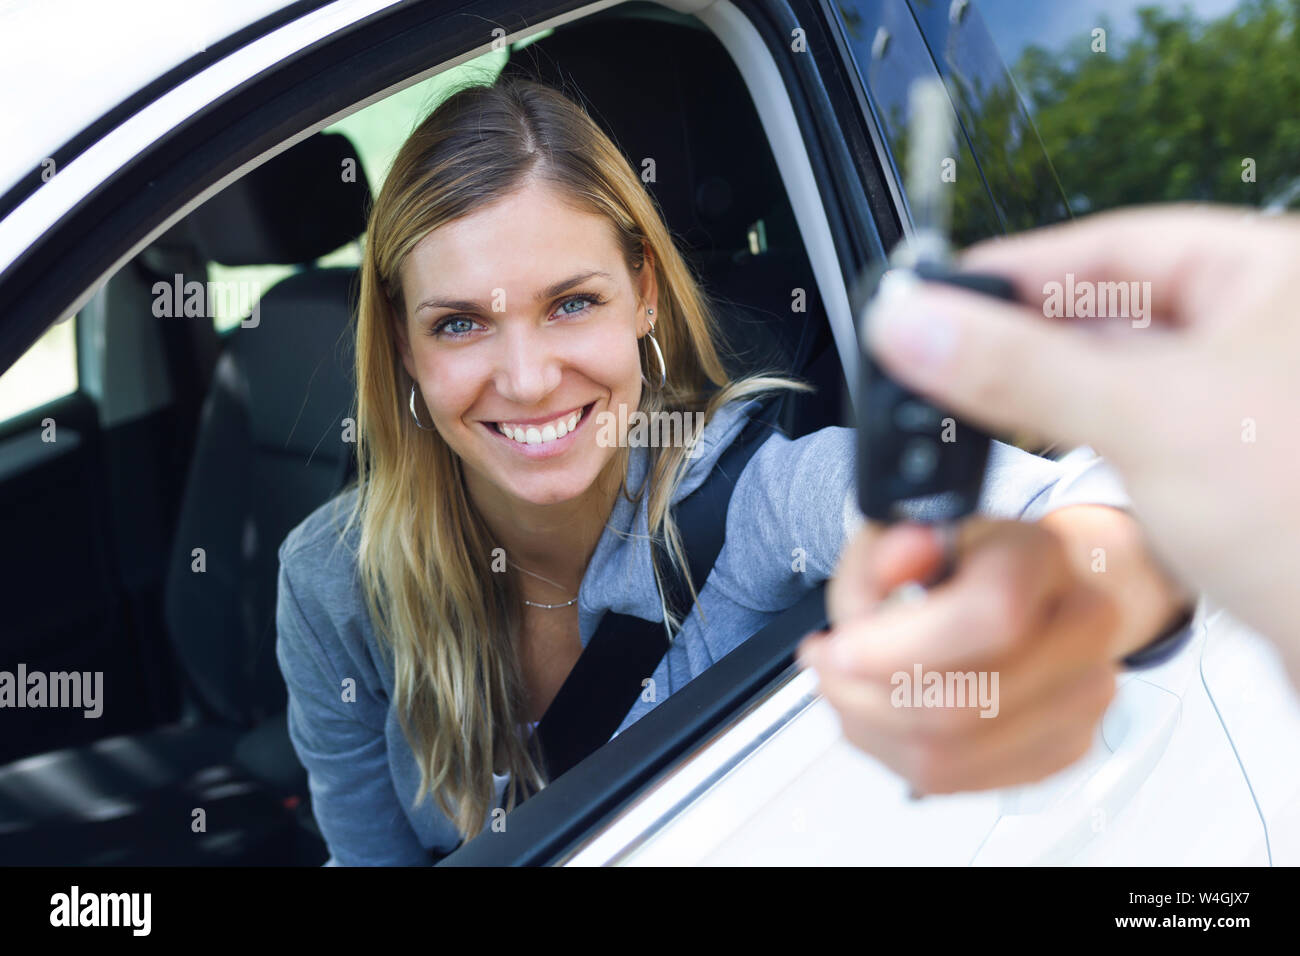 Portrait of smiling young woman looking at camera while holding car keys and give it to someone through the window Stock Photo